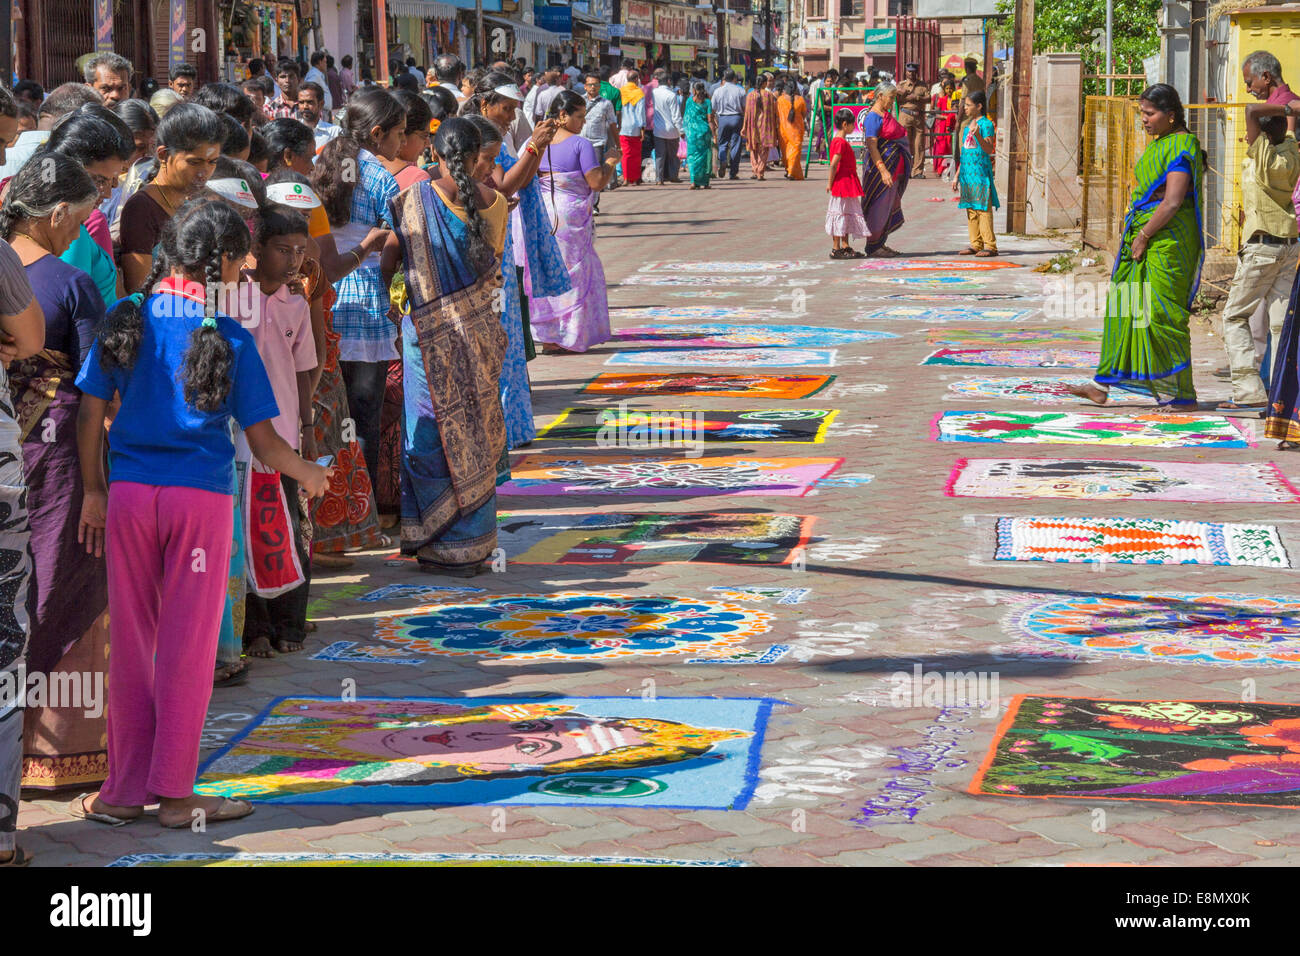 MADURAI INDIAN STREET ART WITH PEOPLE STUDYING THE PICTURES AND TAKING PHOTOGRAPHS ON THEIR MOBILE PHONES Stock Photo